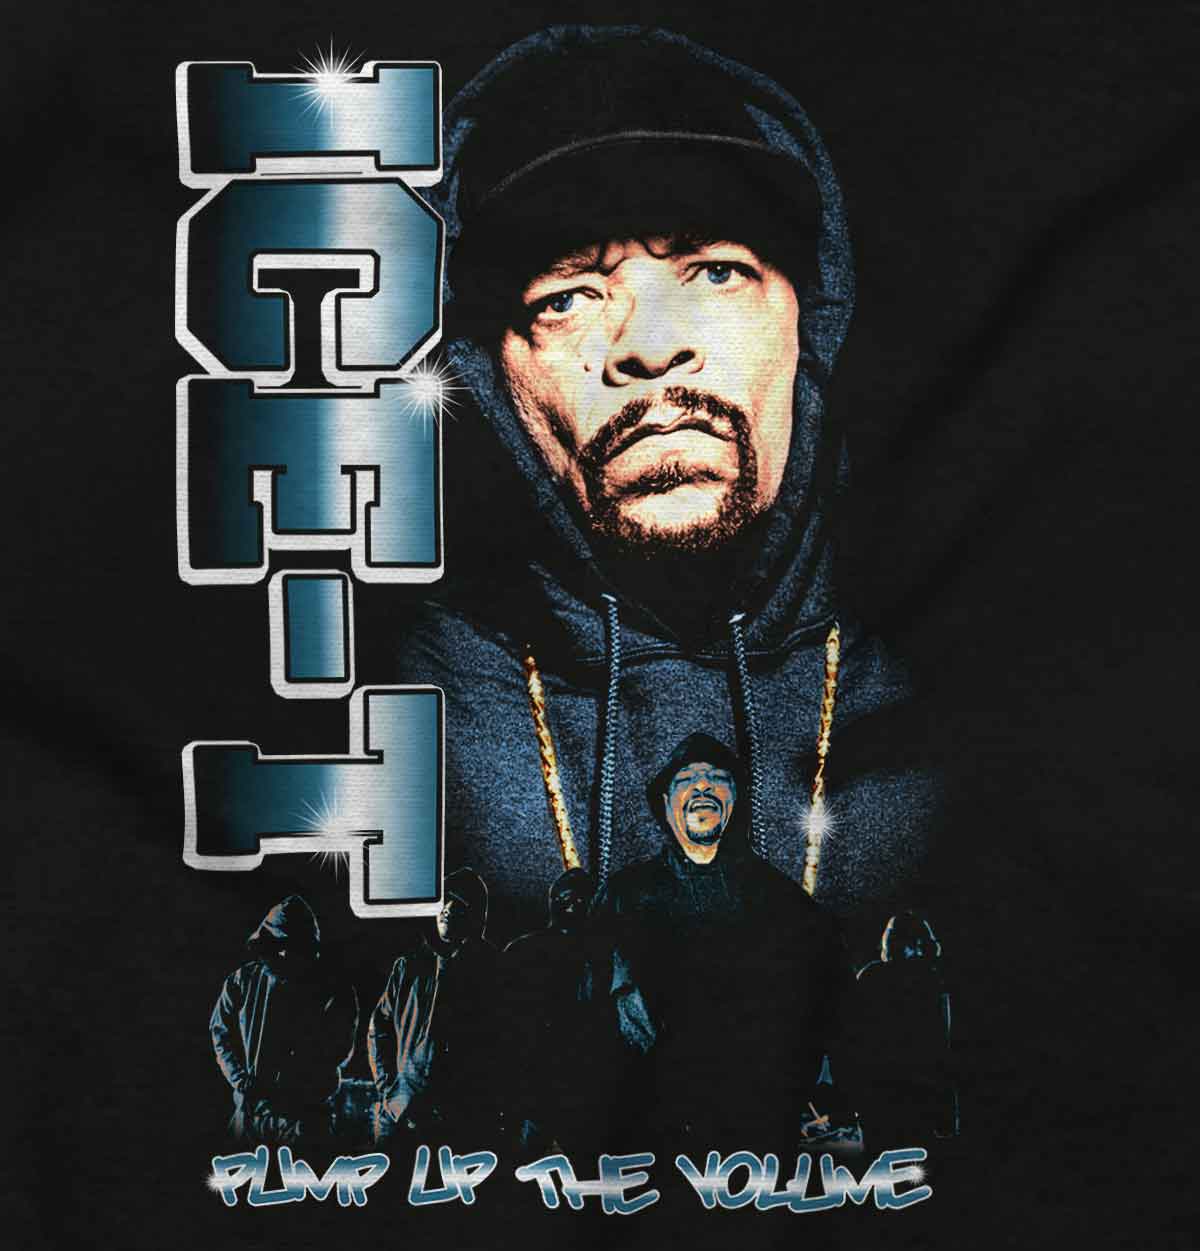 This image features the Pump Up The Volume Shirt, which showcases a hip-hop theme. It includes a picture of the OG ICE-T wearing his iconic beanie with his name on it.